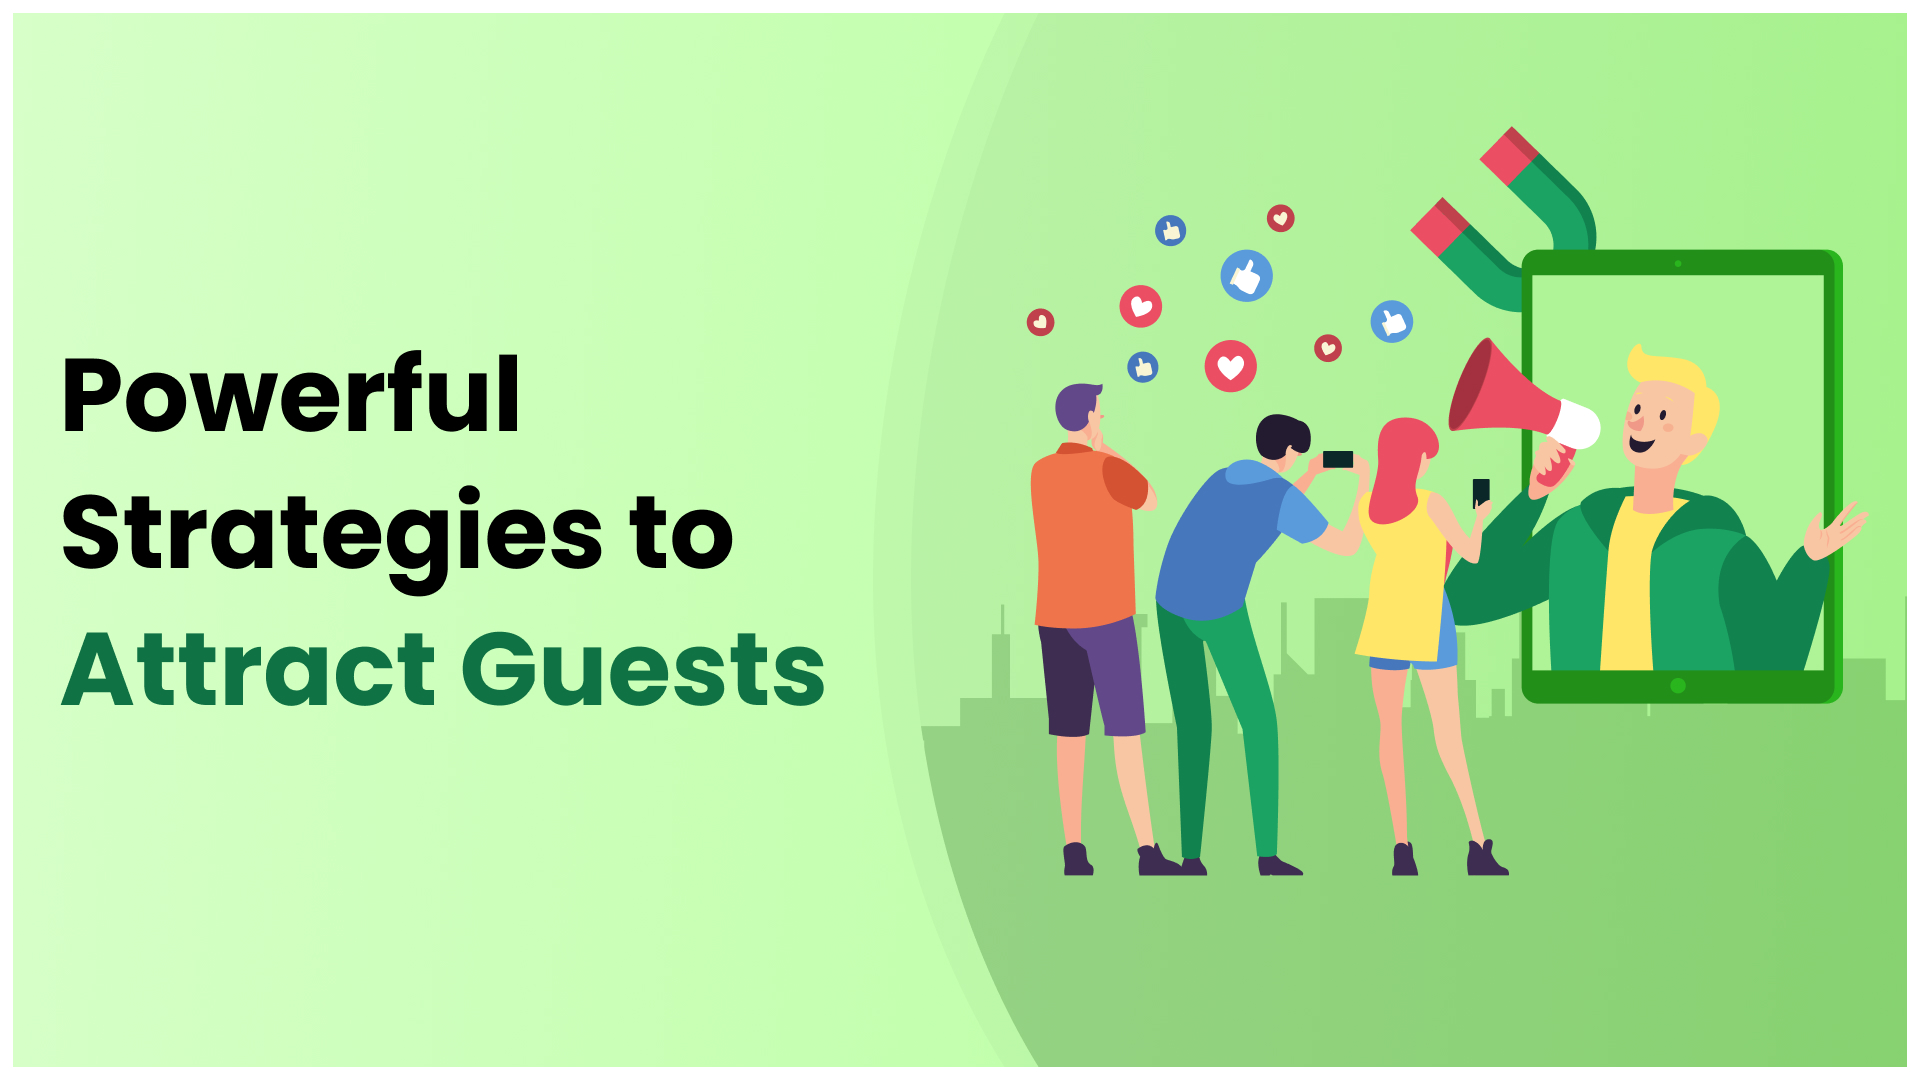 Powerful Strategies to Attract Guests